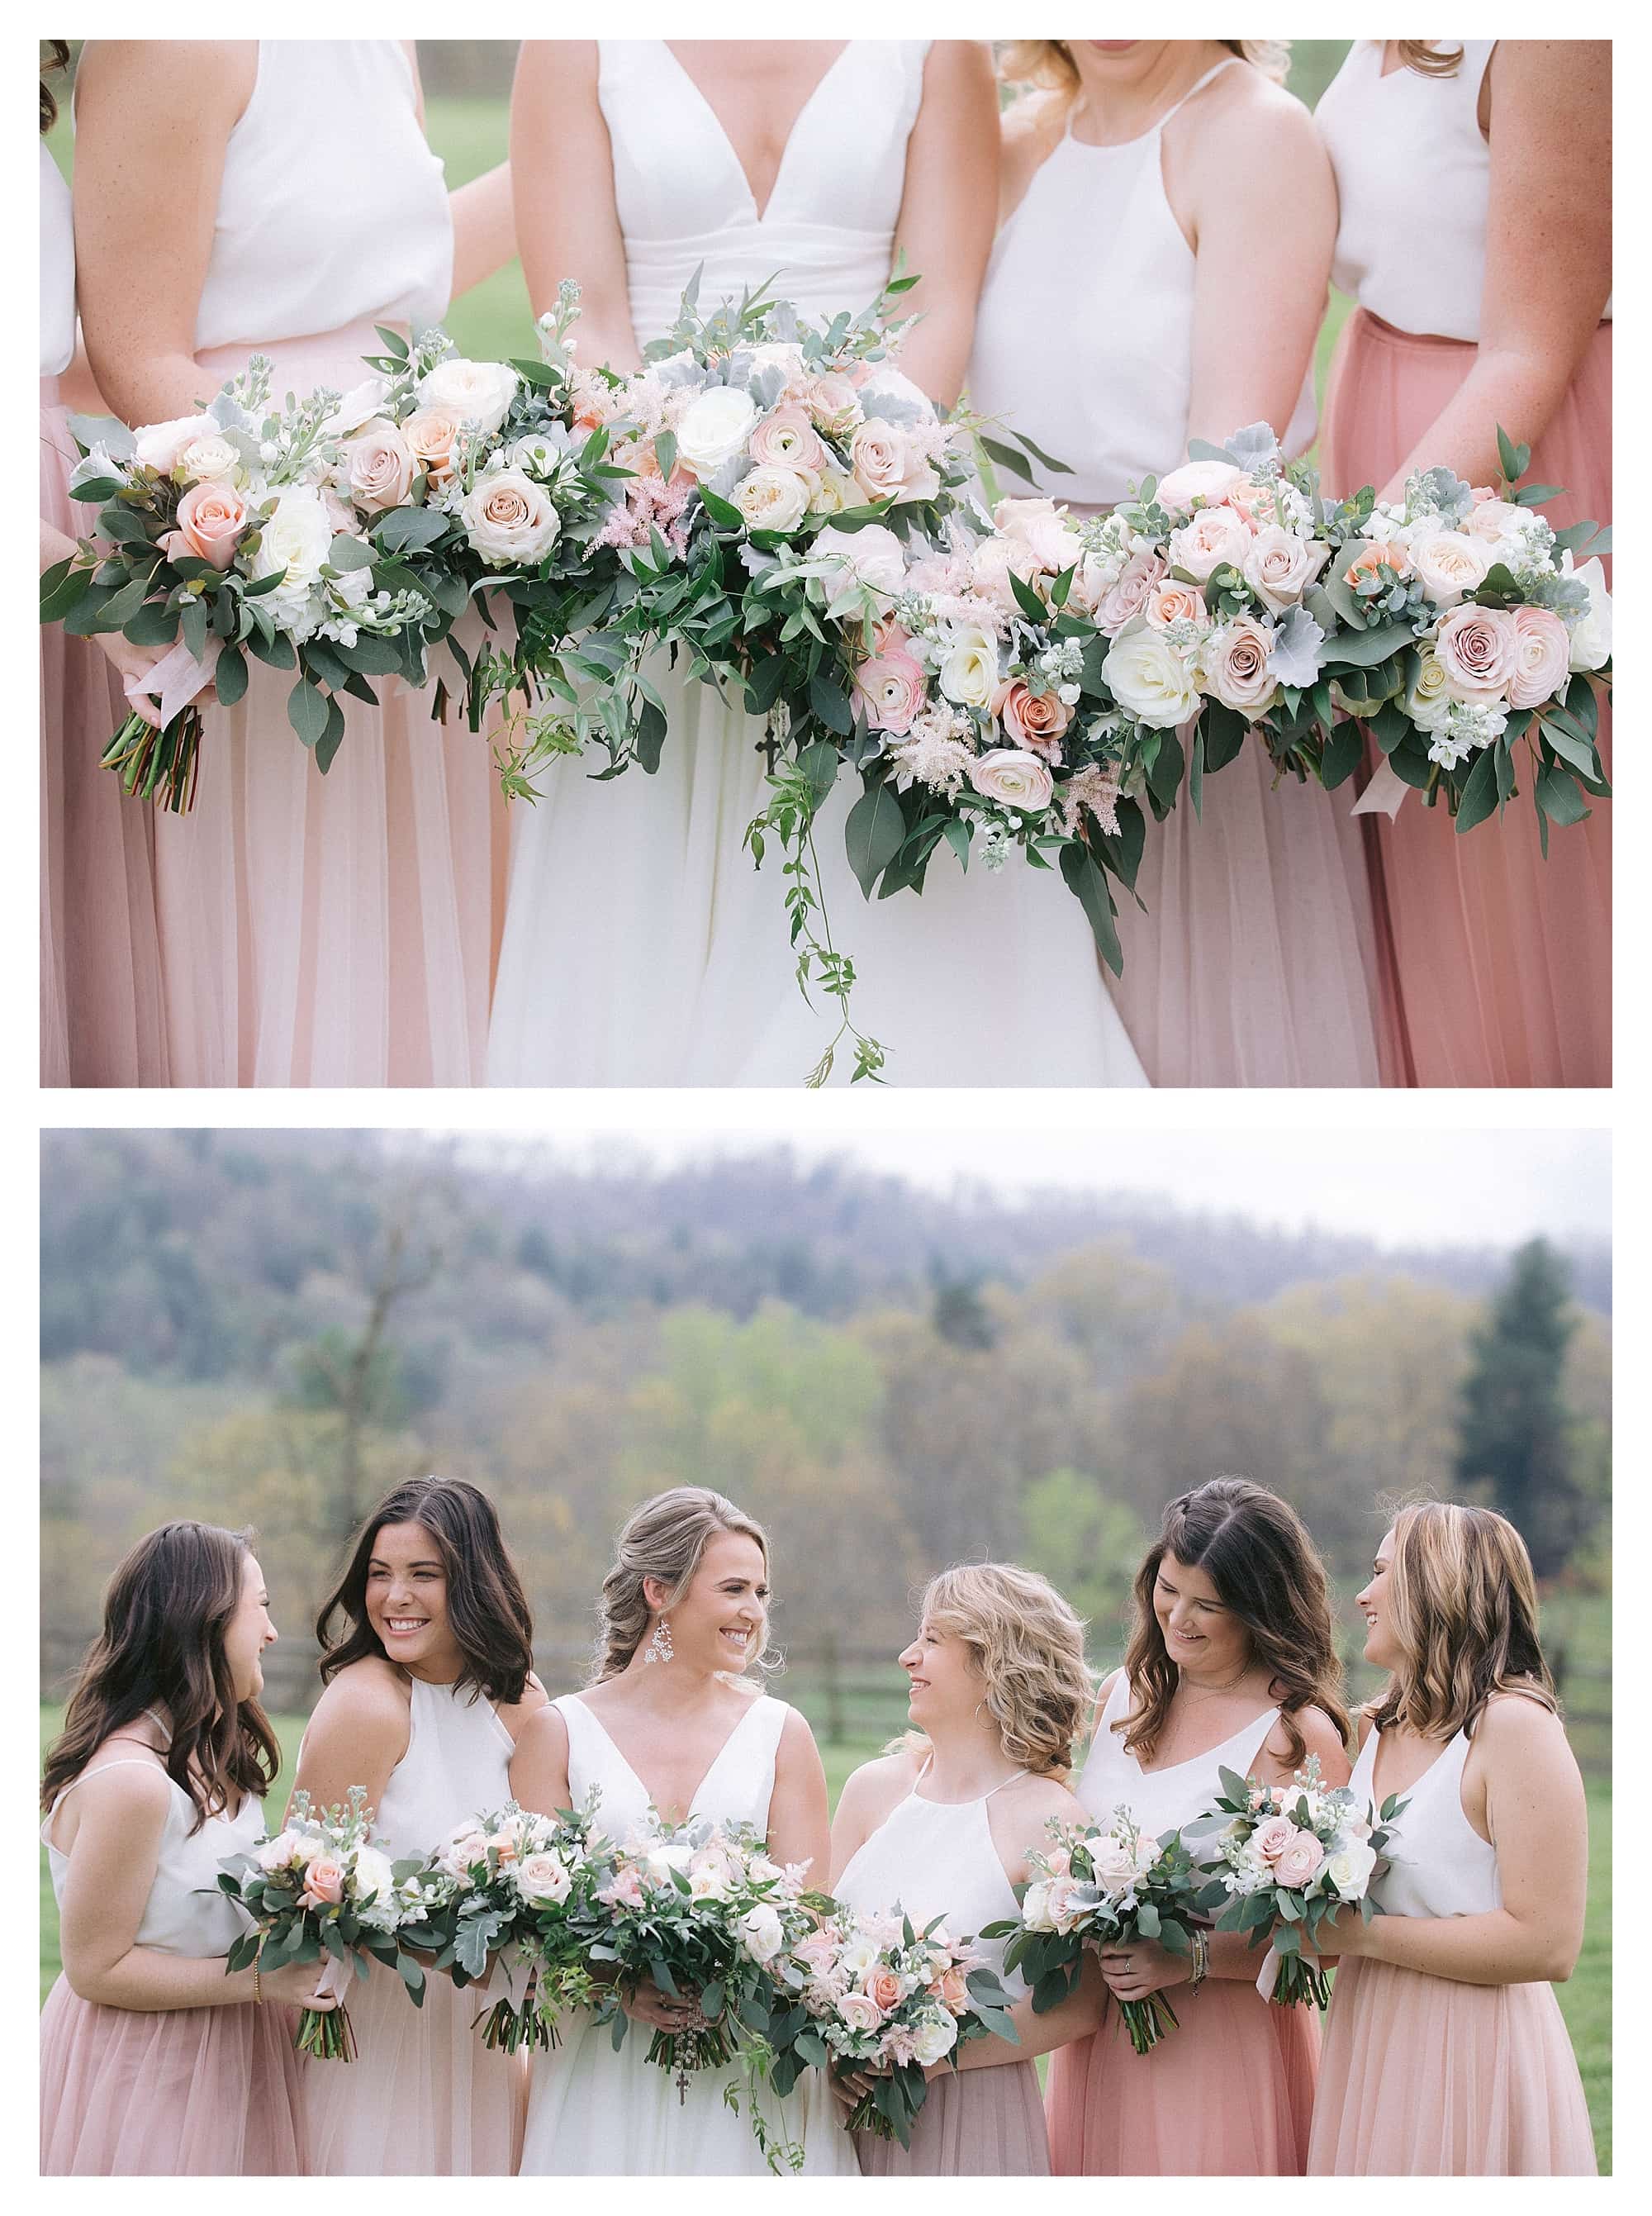 Bride and bridesmaids holding cream and peach floral bouquets laughing